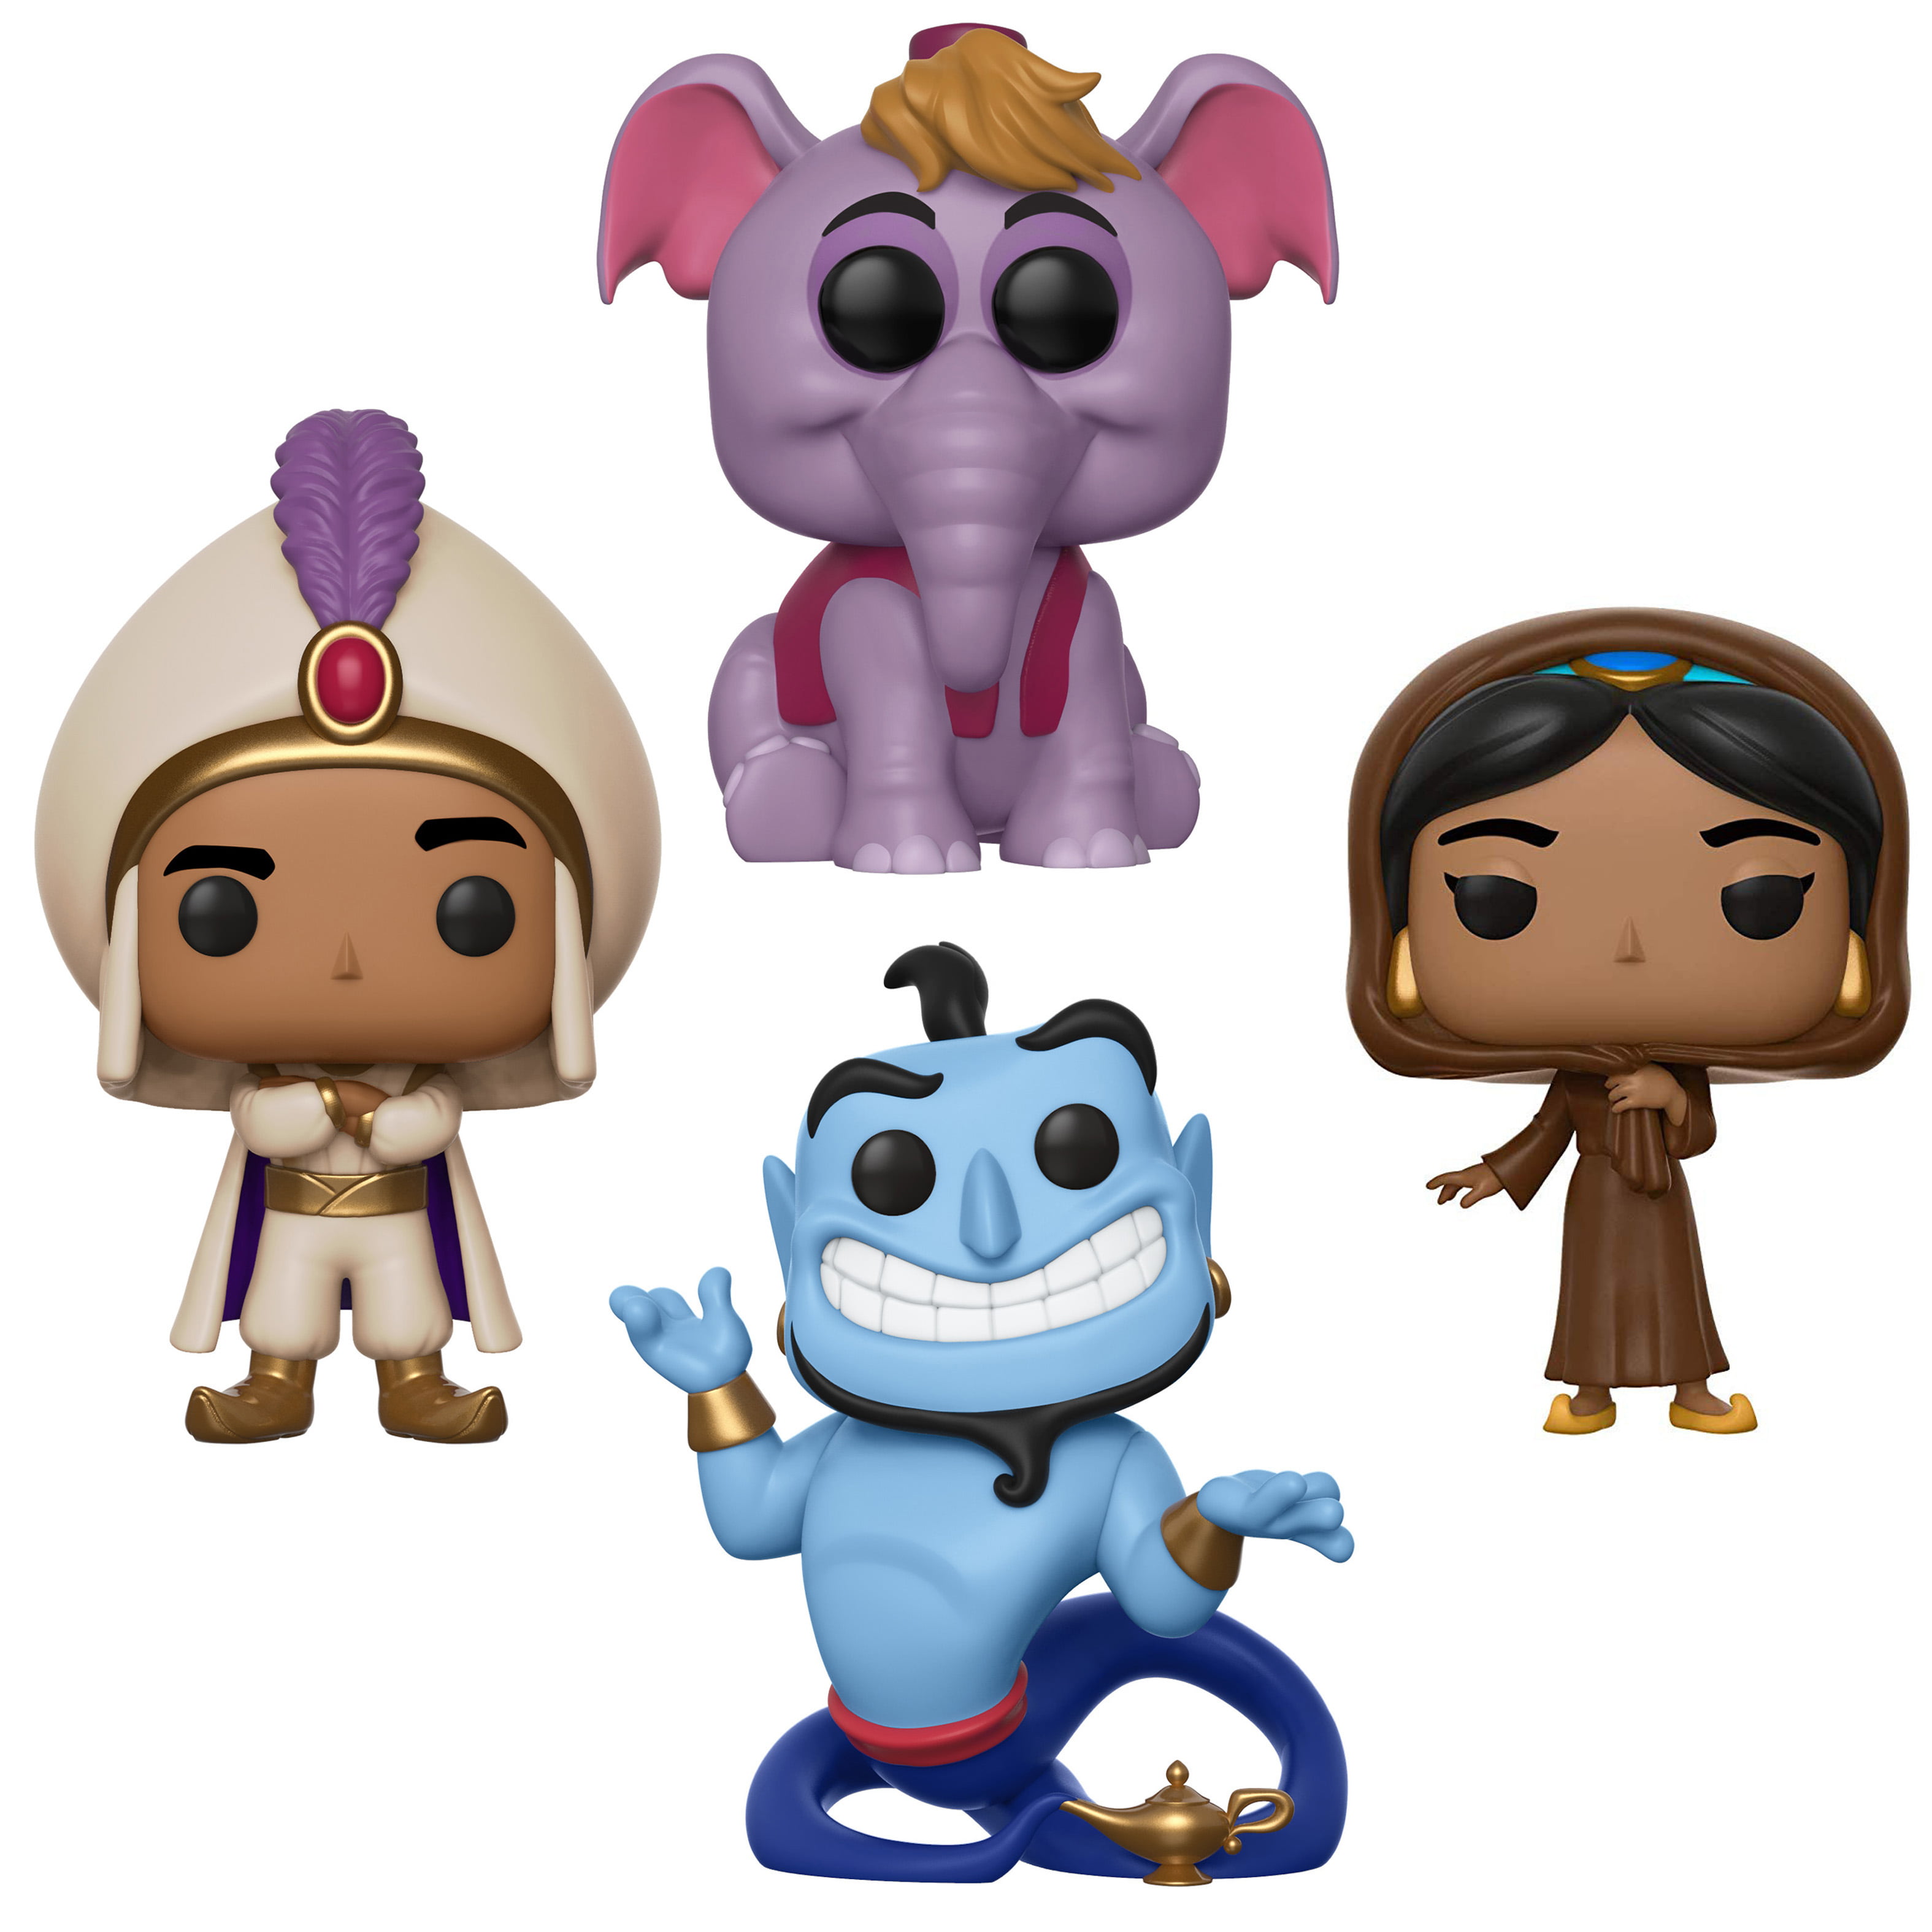 Funko POP! Disney Aladdin: Prince Ali, Jasmine in Disguise (Possible  Limited Chase Edition), Elephant Abu, Genie with Lamp (Collector's  Edition)